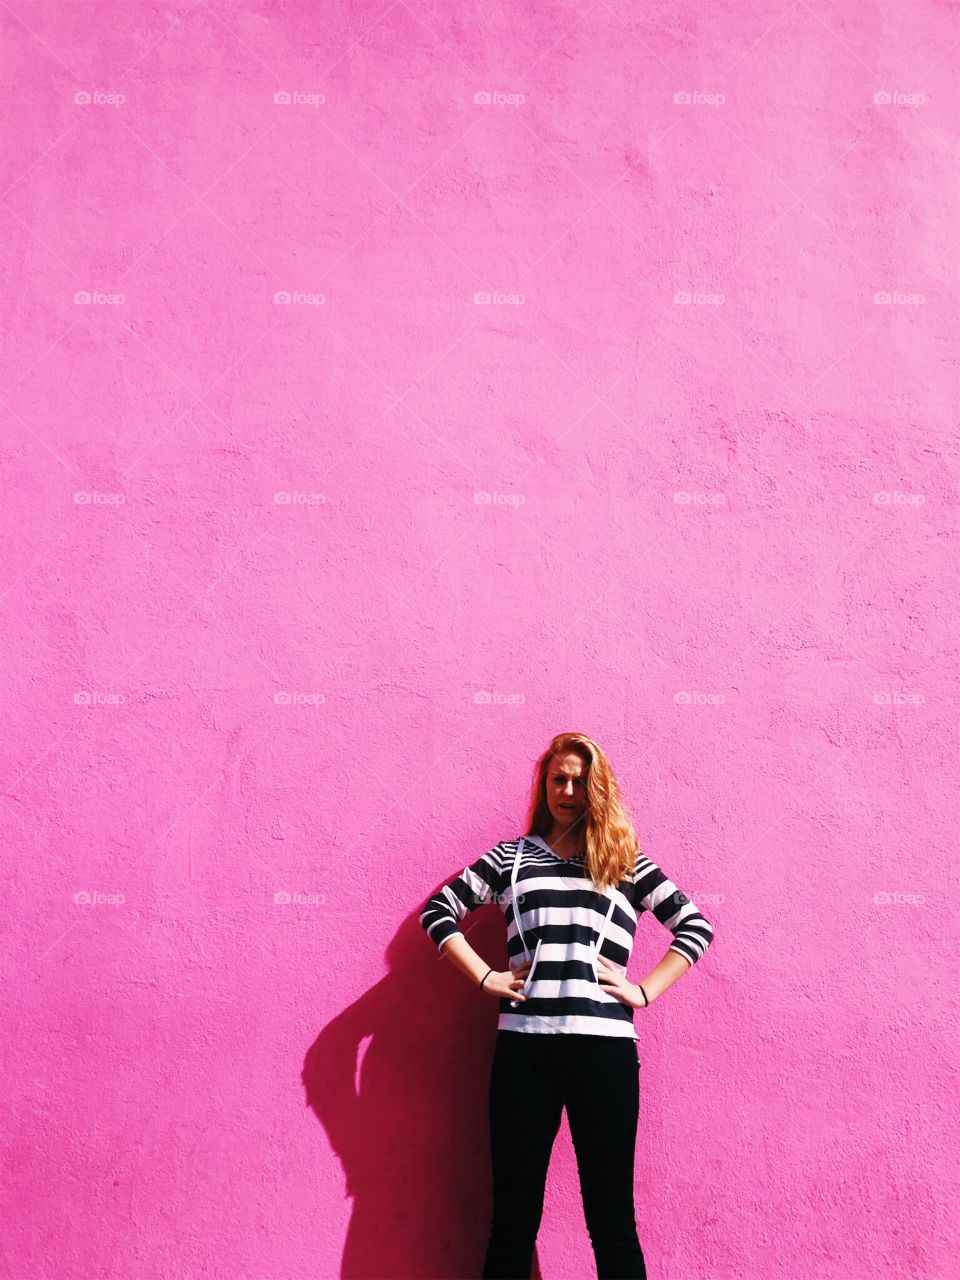 the pink wall